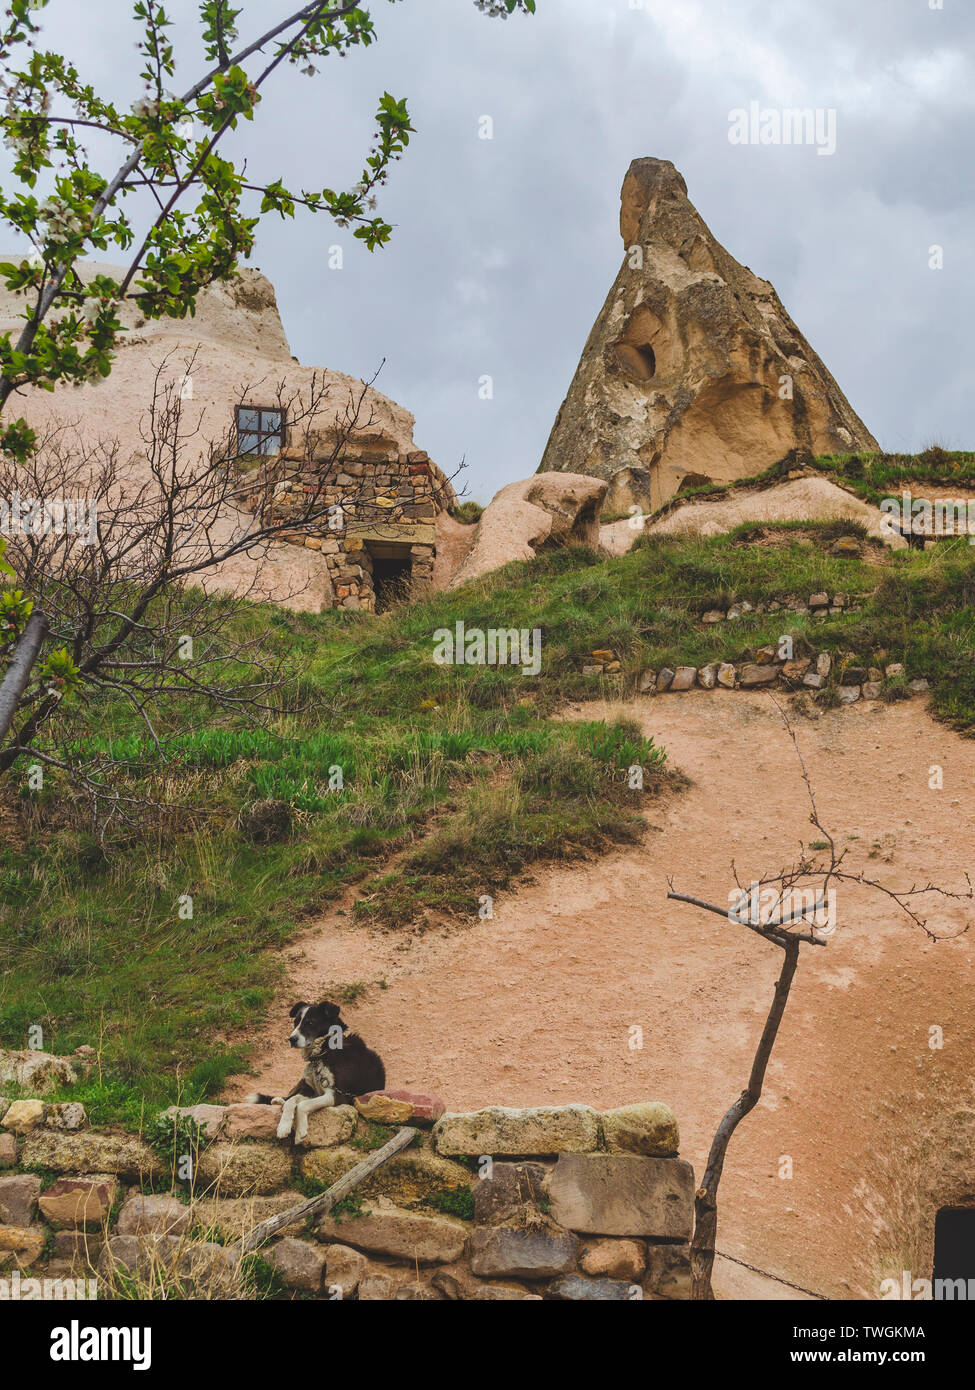 Dwellings in the rocks of volcanic tuff in Turkish Cappadocia. Guard dog in the foreground. Stock Photo